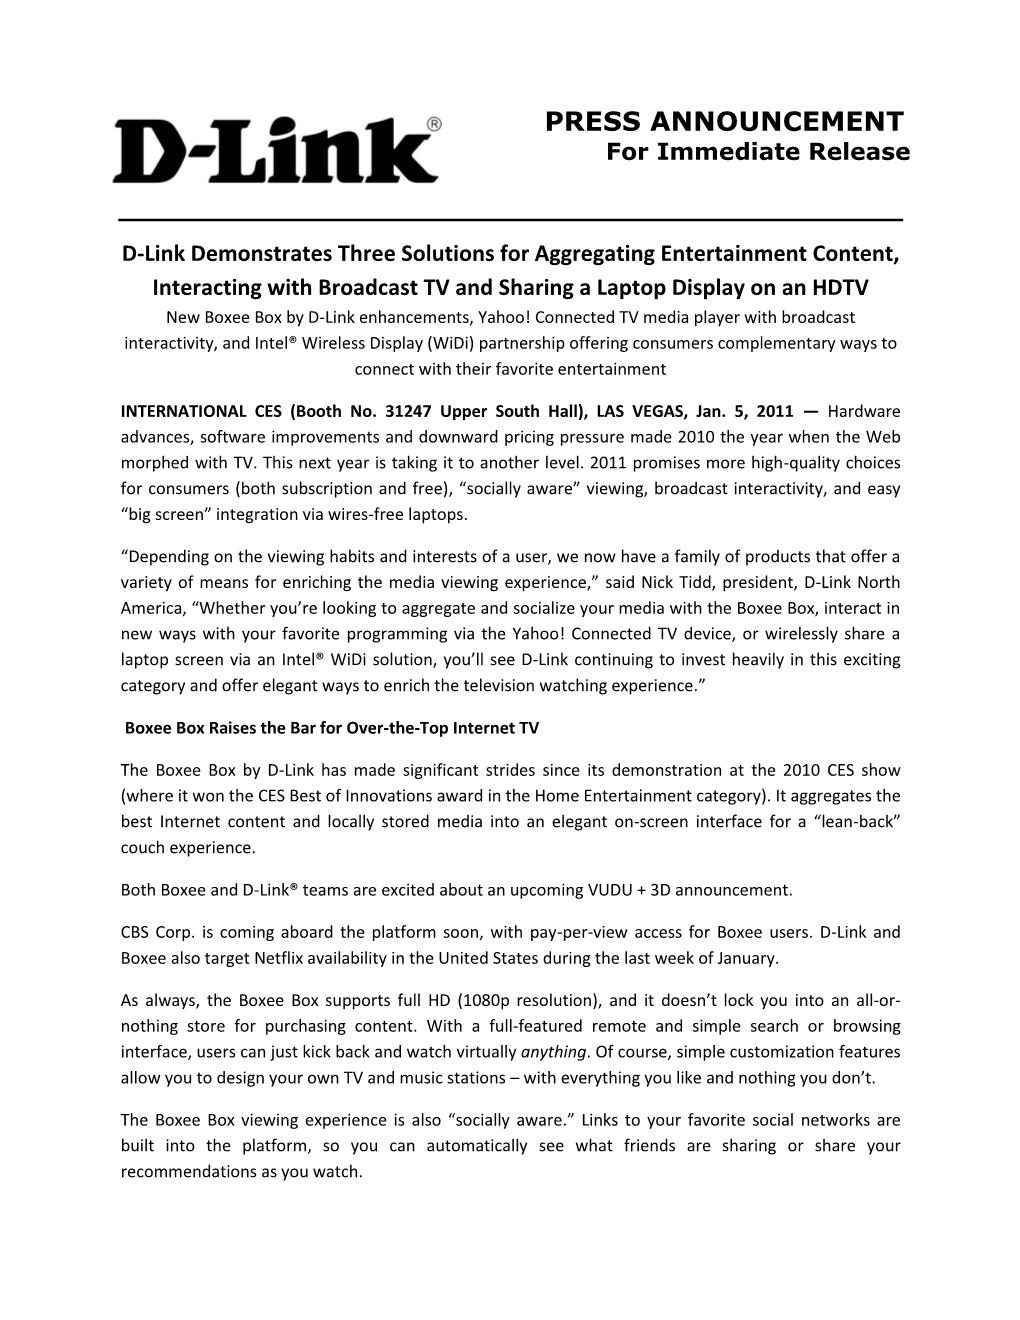 D-Link Demonstrates Three Solutions at CES 2011